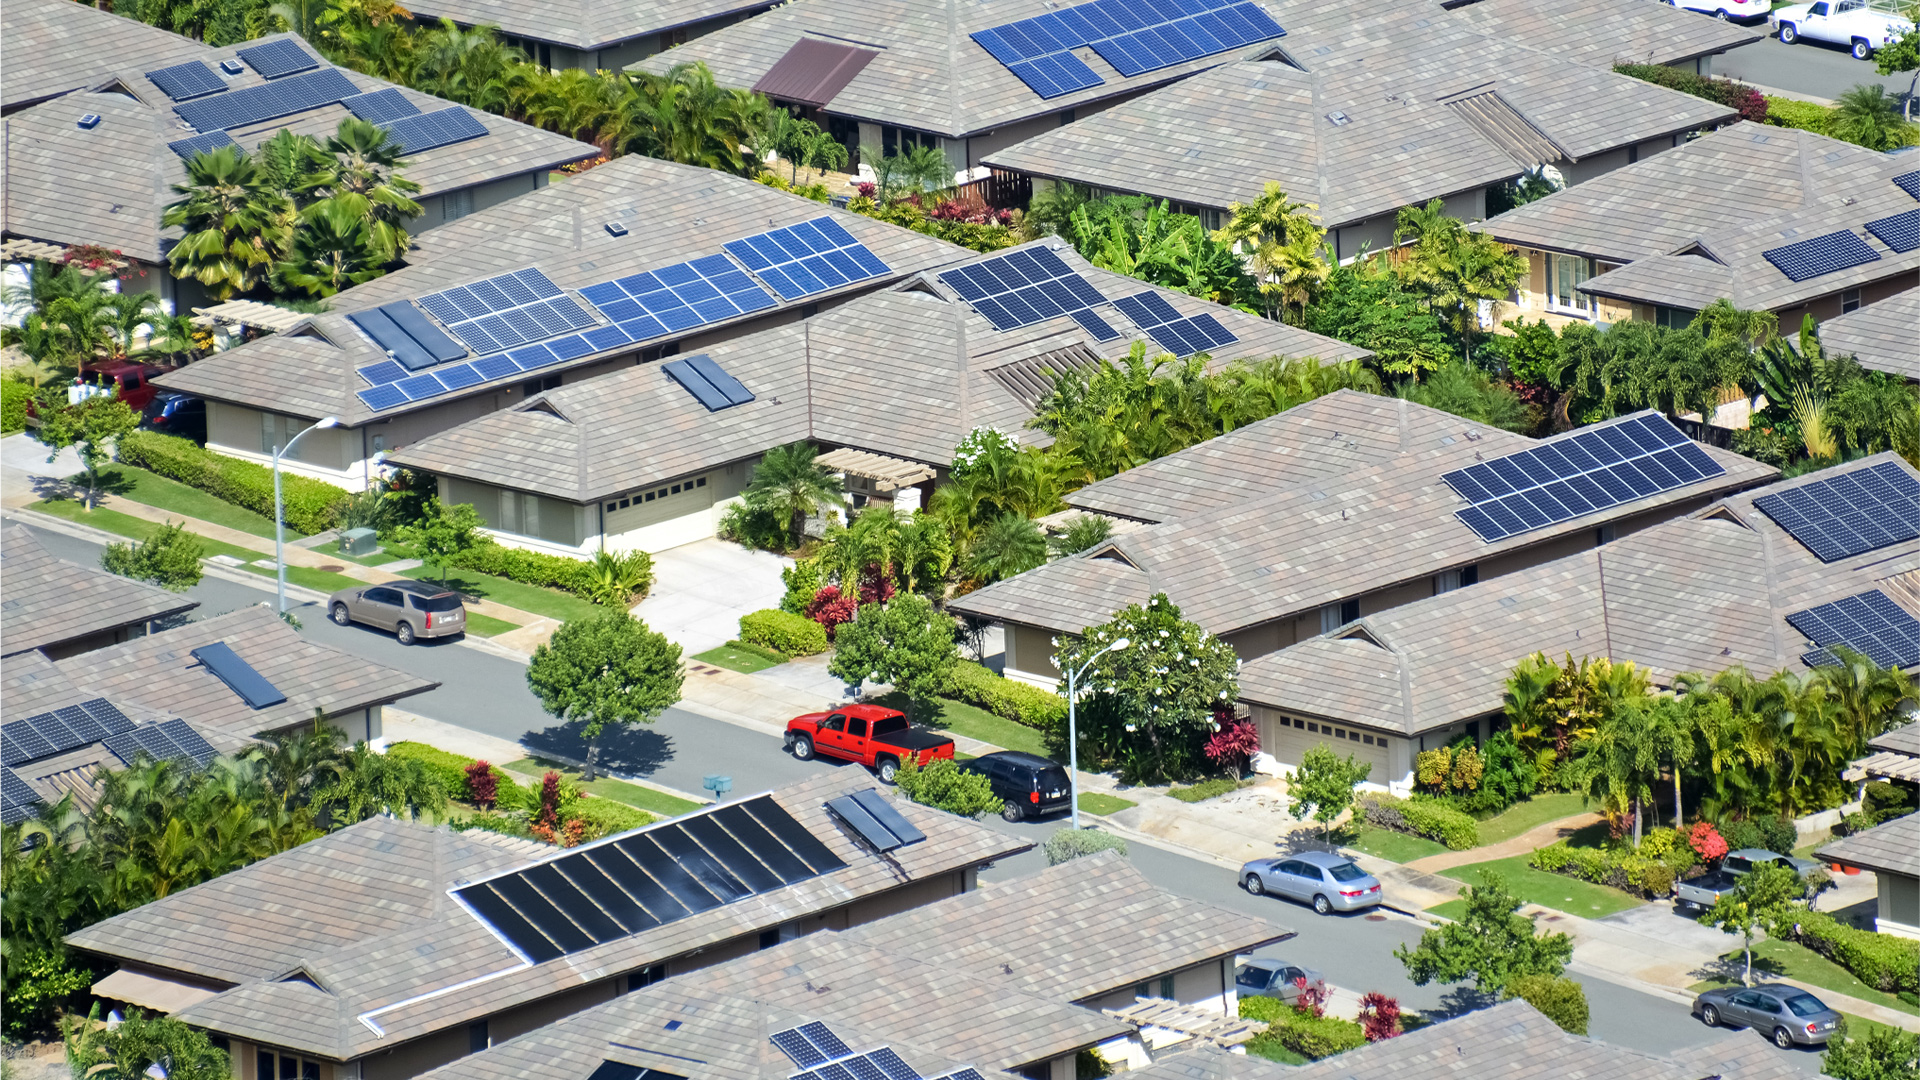 Aerial view of solar panels on roofs of houses